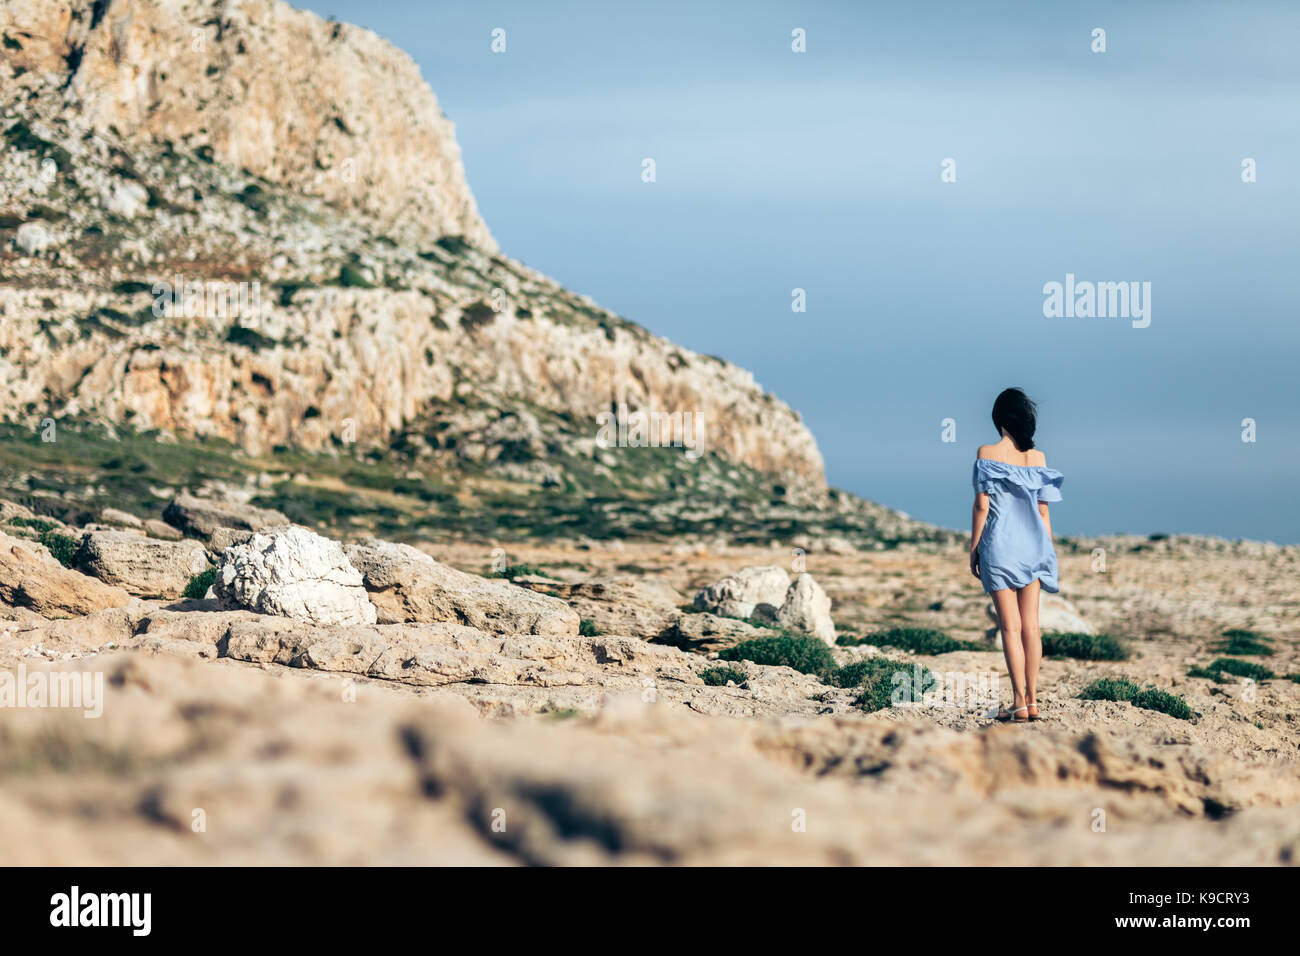 Back view of lonely woman walking on rocky desert with dramatic sky Stock Photo